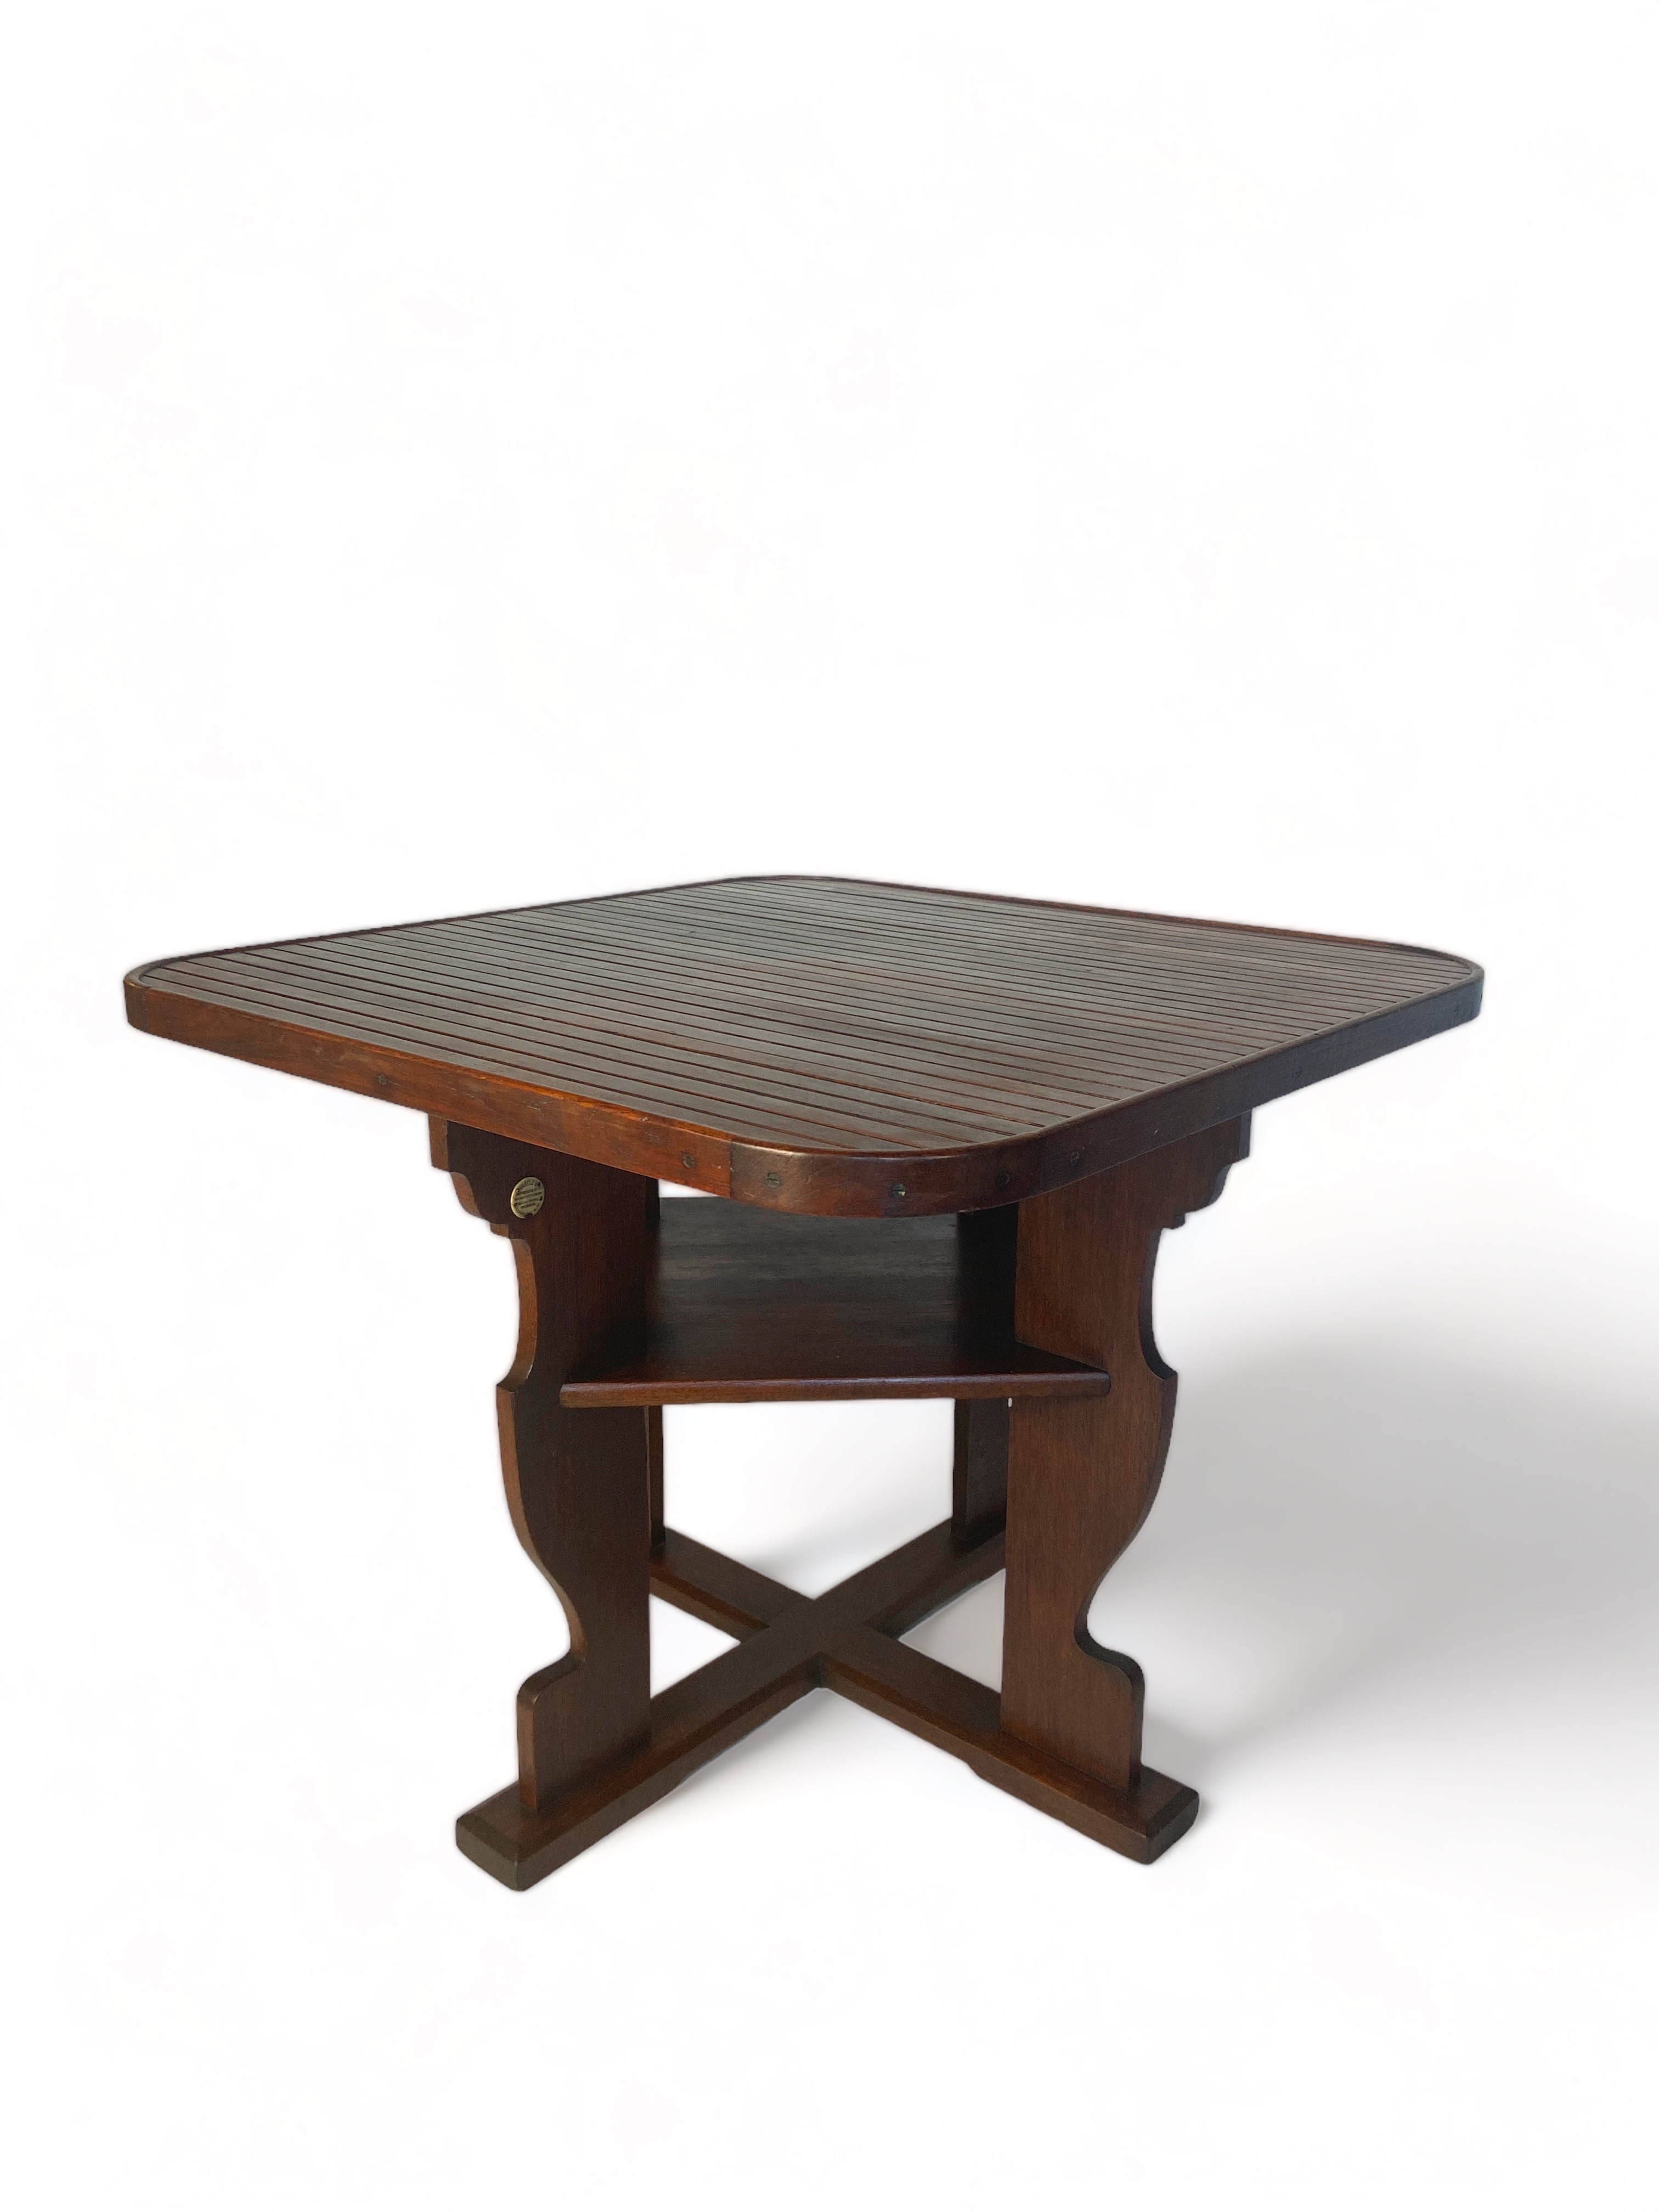 A 1930's Art Deco teak Collingwood design garden set of table and chairs by Castle's of London proba - Image 7 of 8